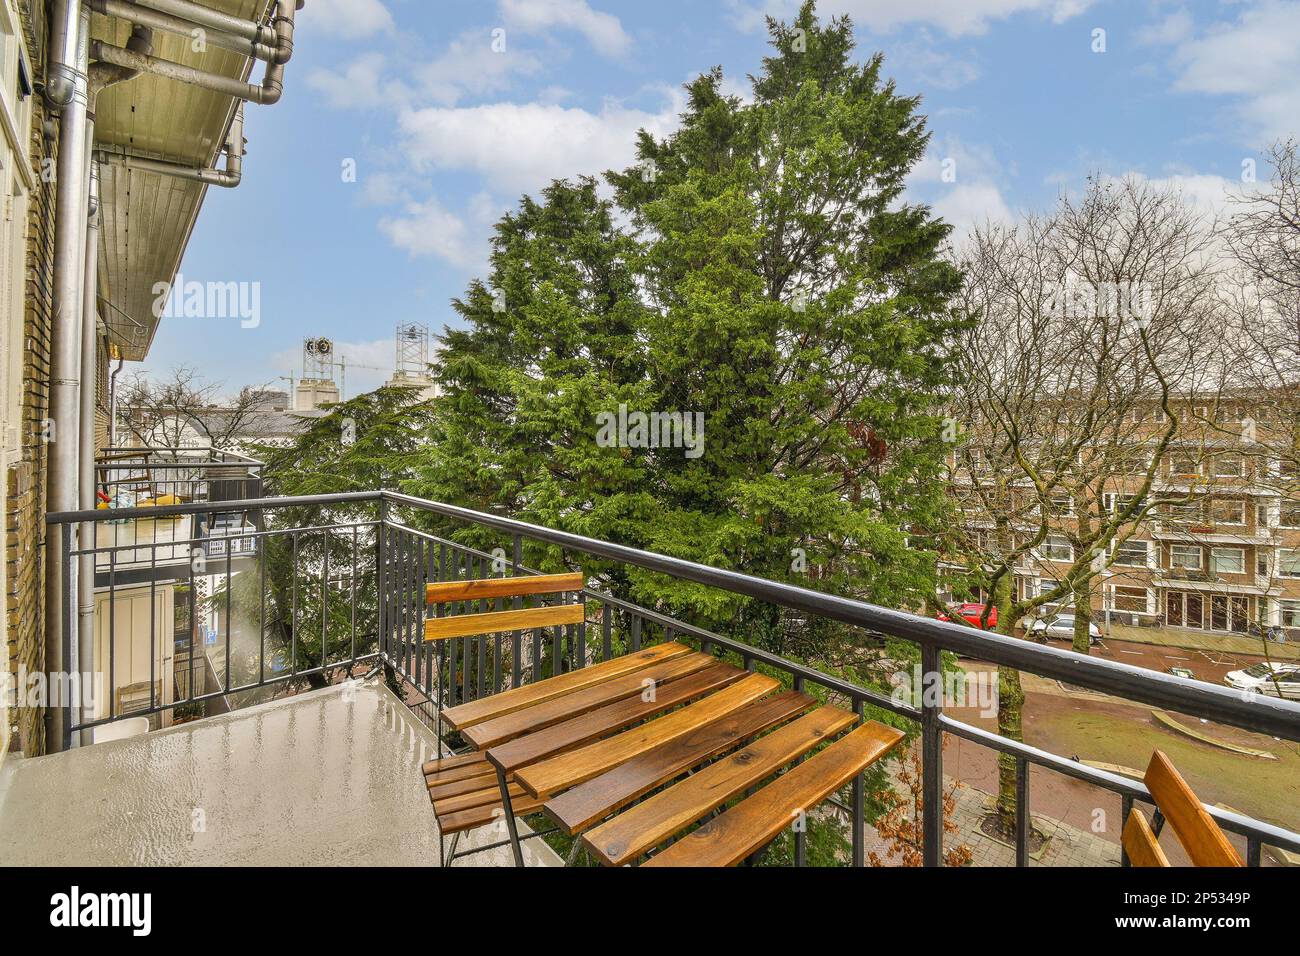 some wooden benches on a balcony with trees and buildings in the background, taken from an apartment's balcony Stock Photo